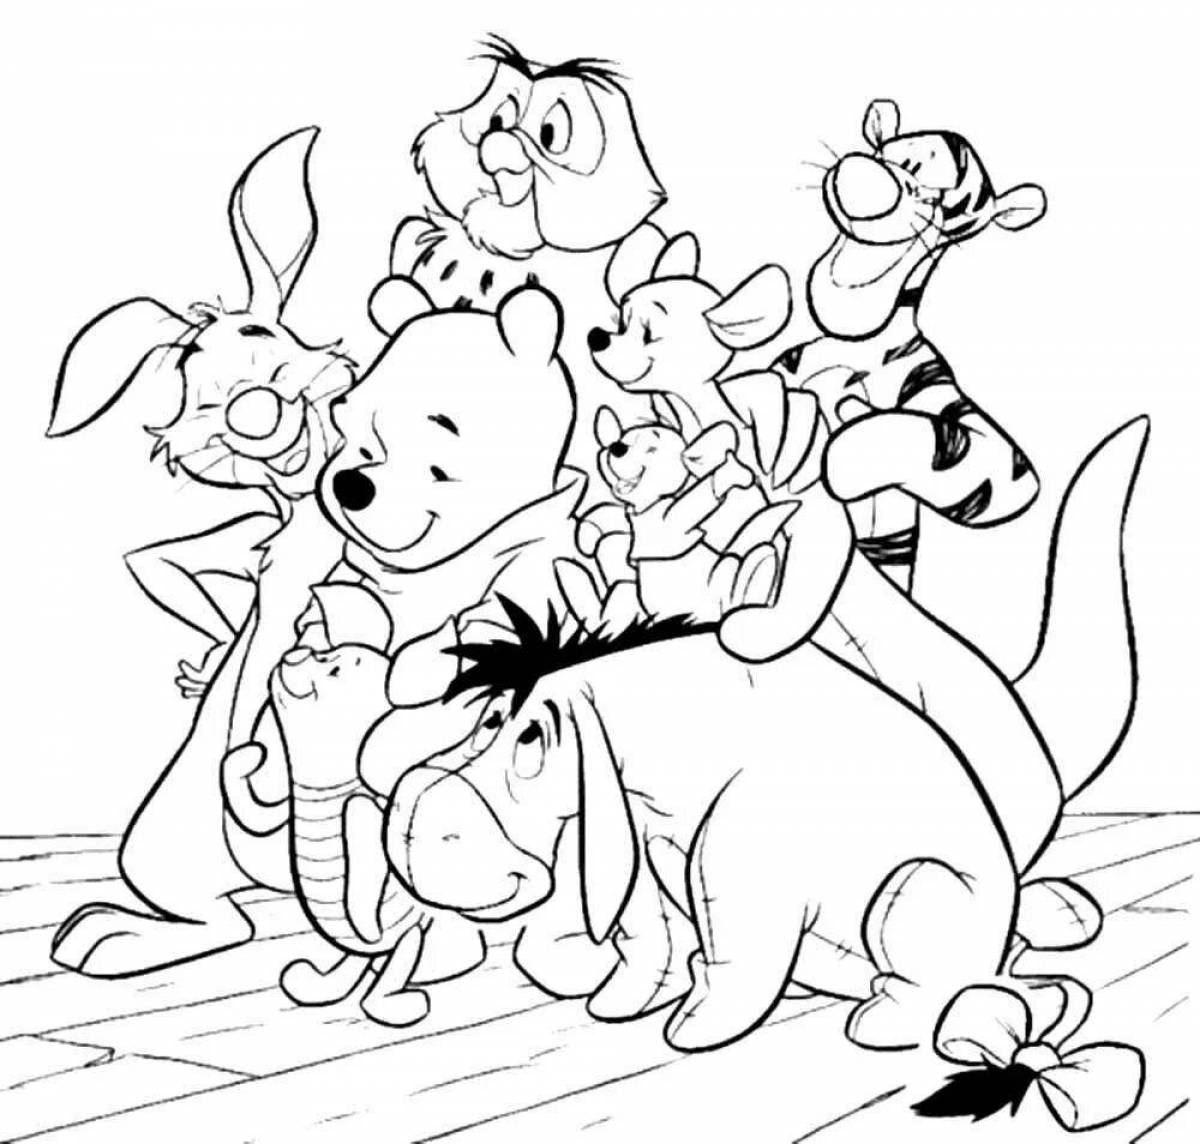 Coloring pages with prominent cartoon characters for kids